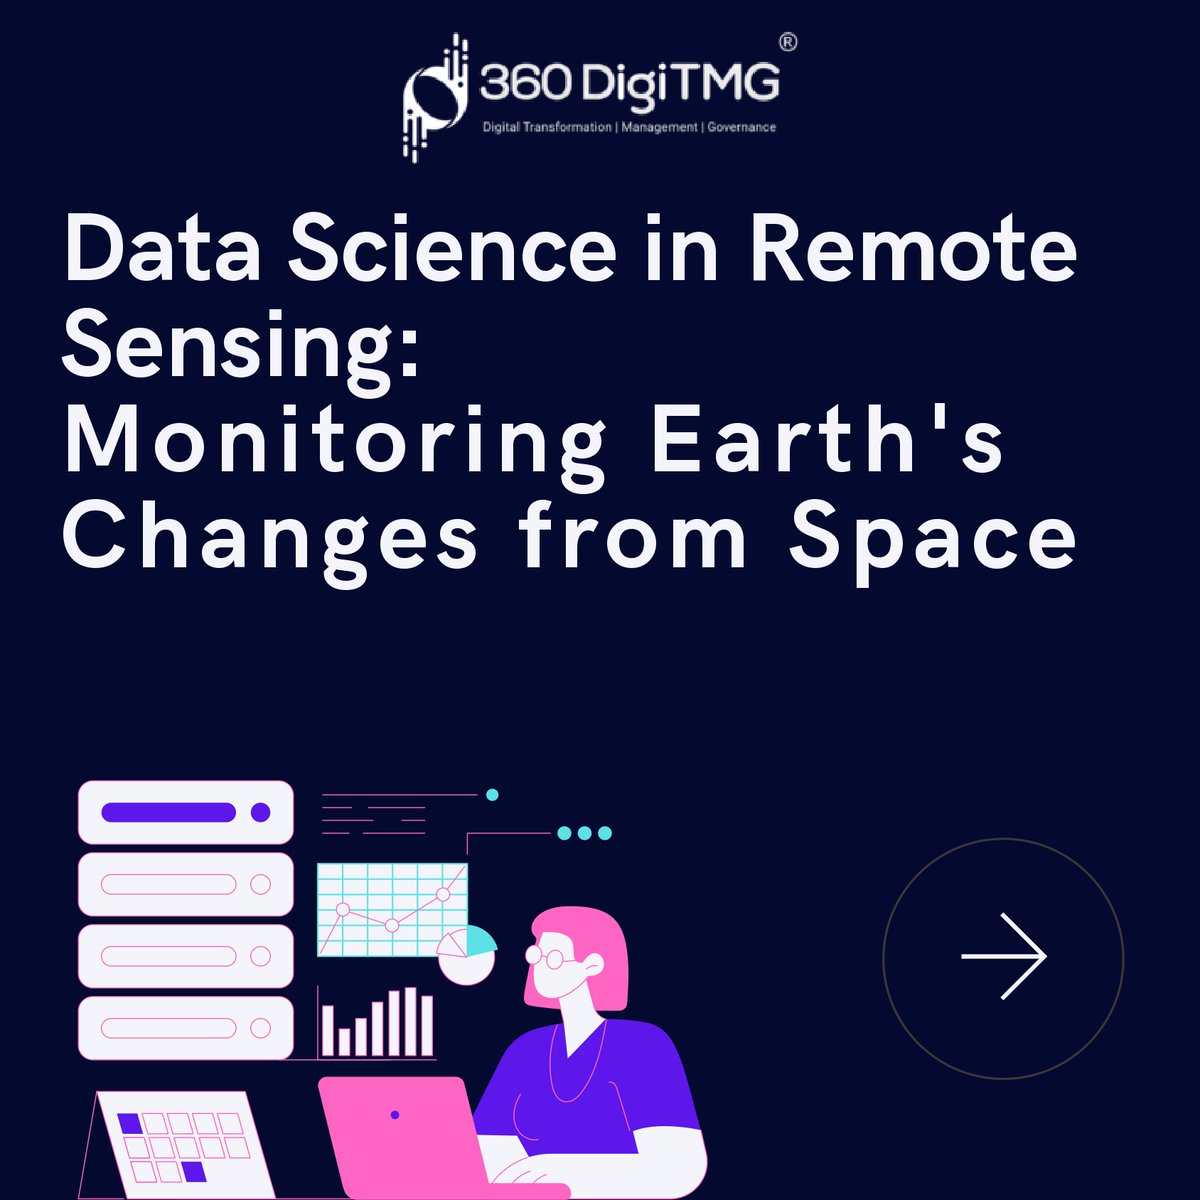 Viewing Earth's evolution from above: How data science fuels remote sensing for monitoring our planet's transformations.

#datascience #remotesensing #foodsecurity #360DigiTMGmalaysia (1/11)